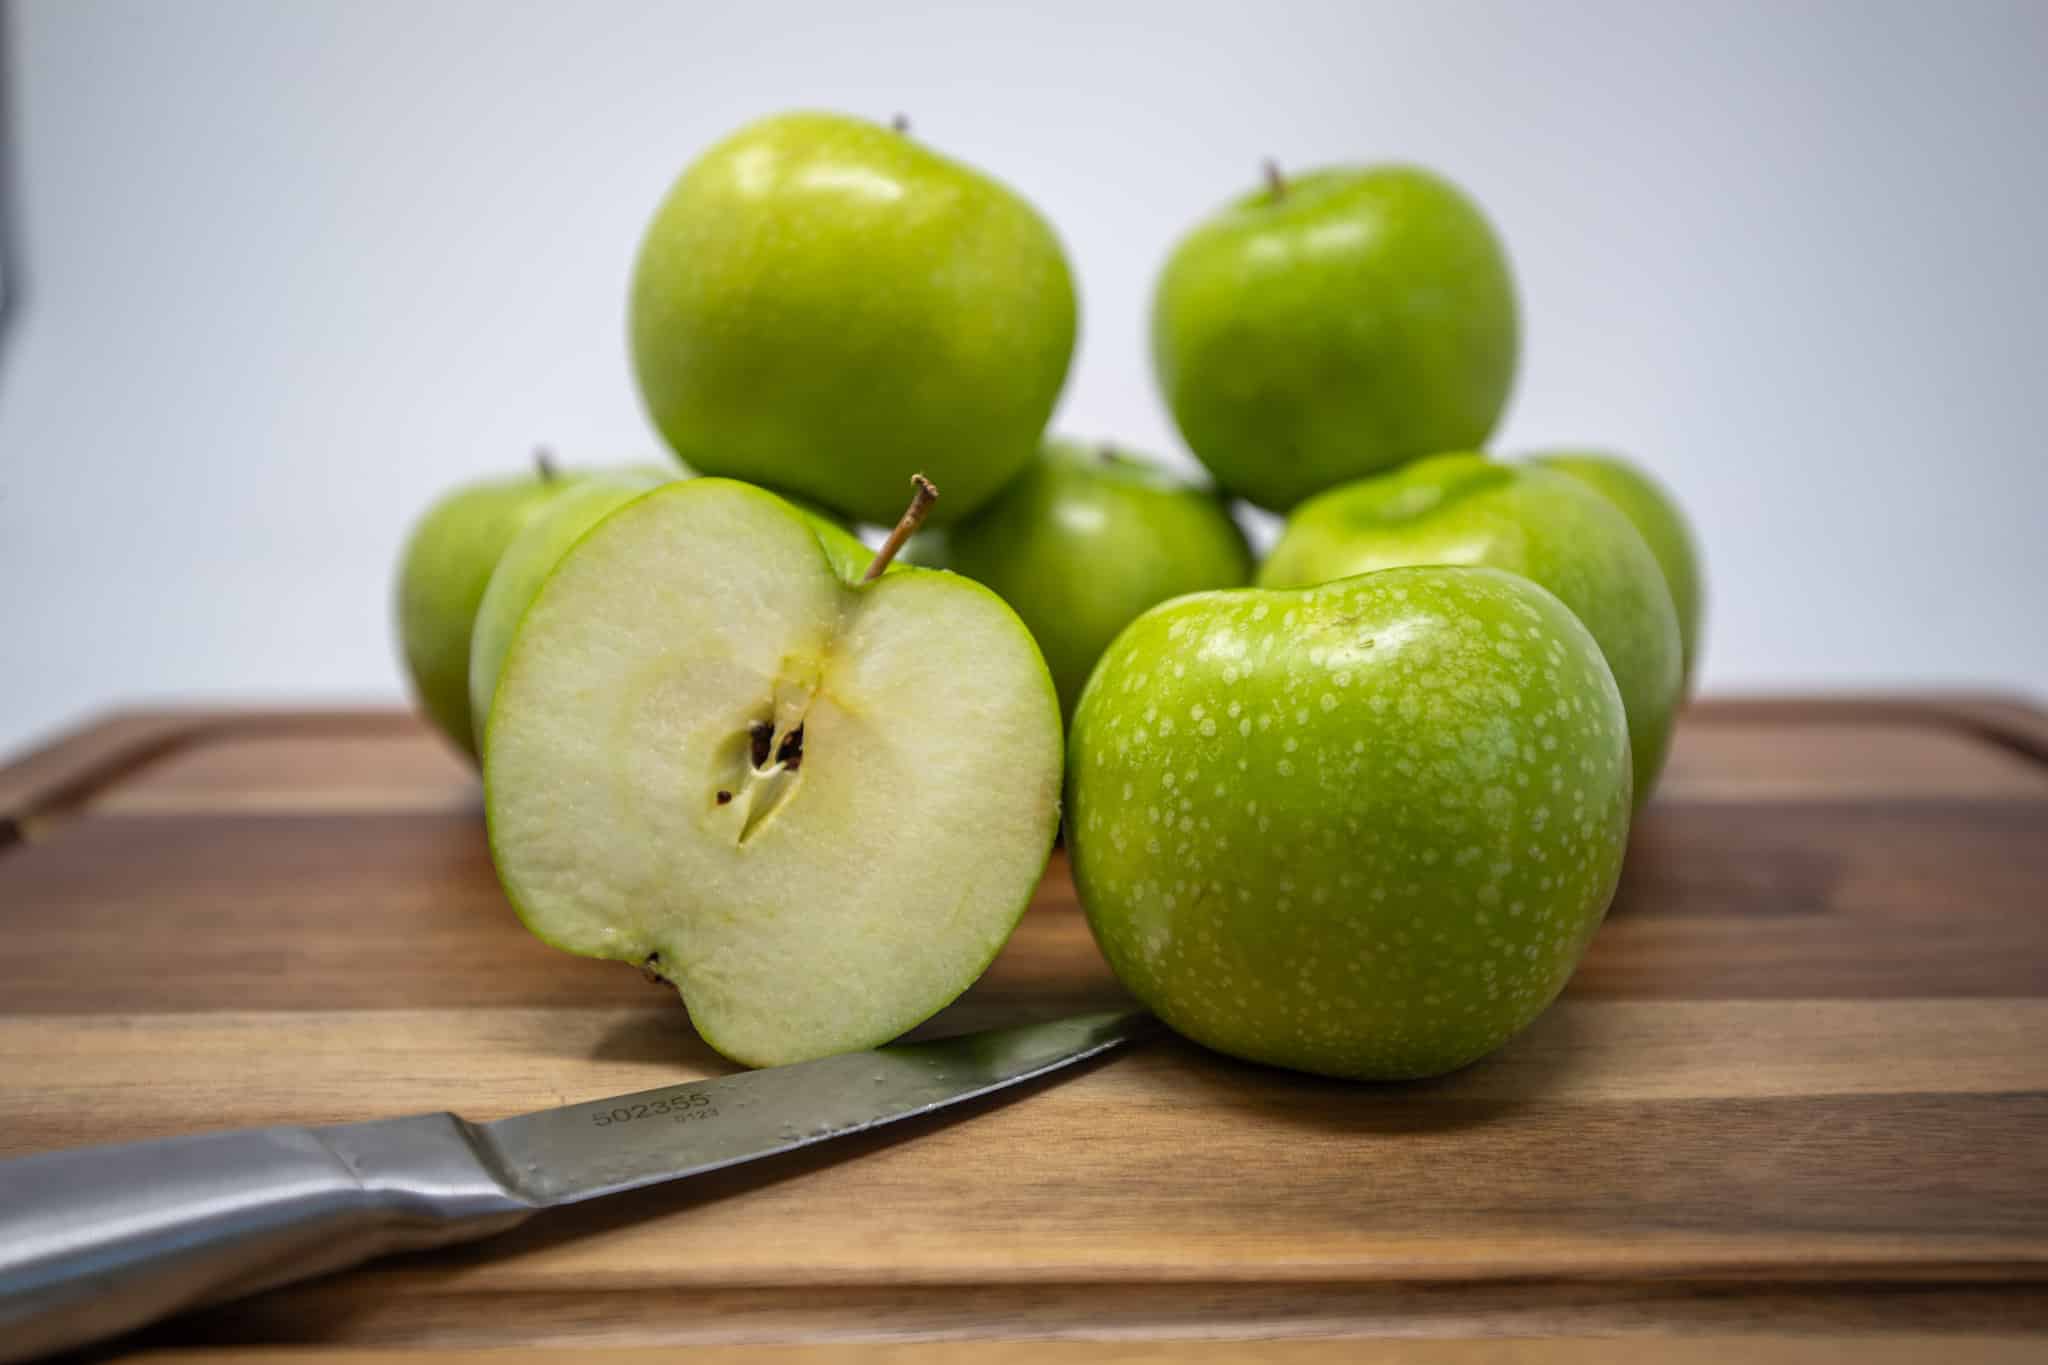 Simple Truth Organic™ Green Granny Smith Apples-Each, Large/ 1